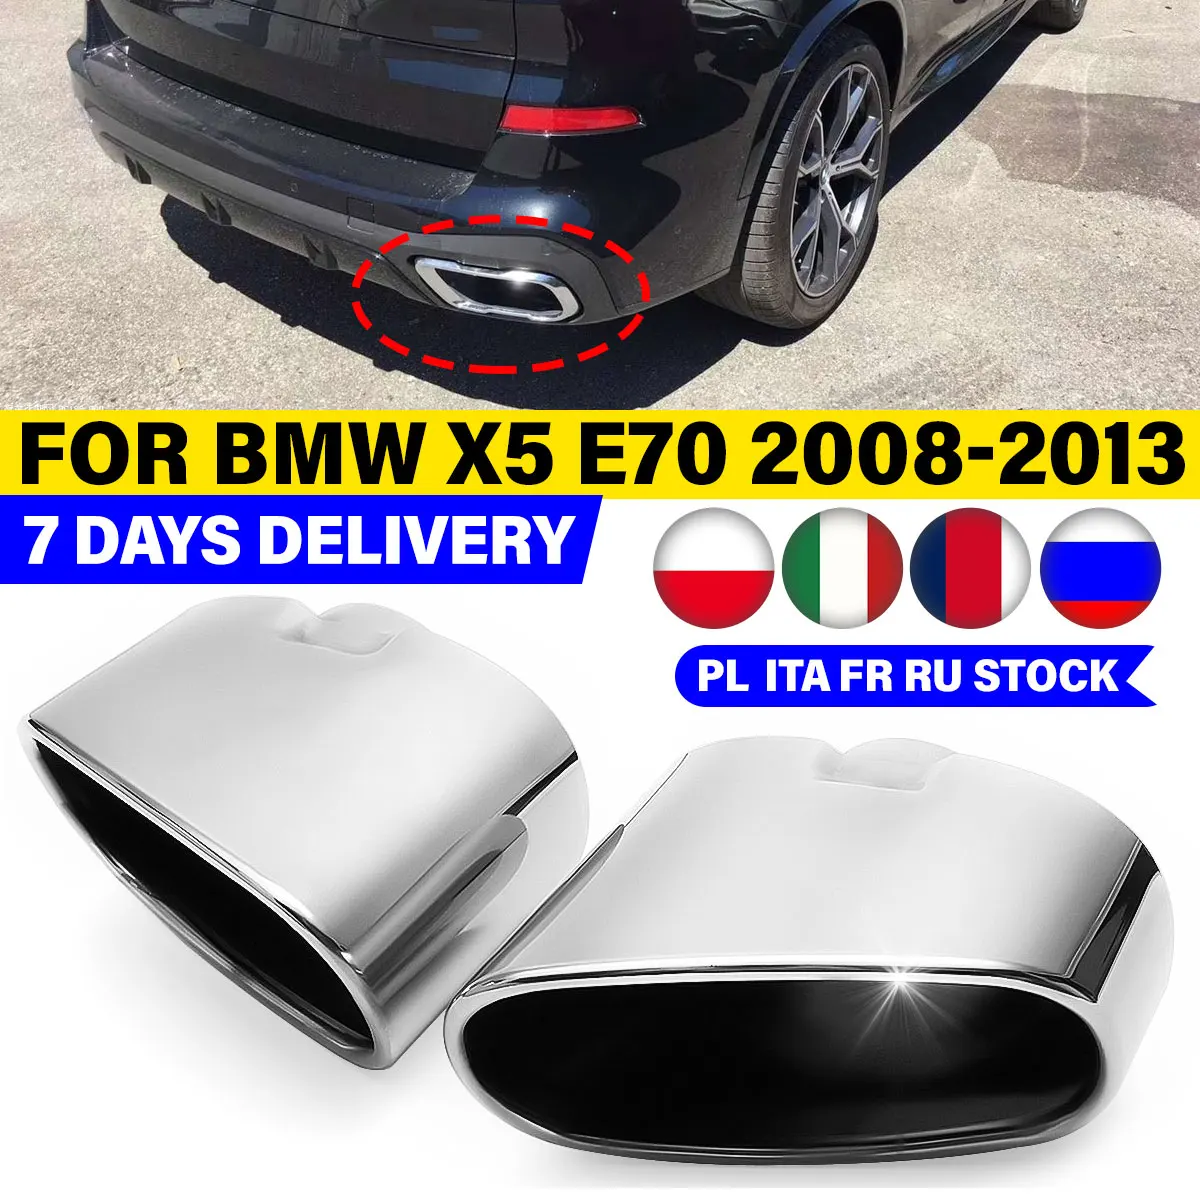 Double Chrome Twin Exhaust Pipe Muffler Tip Trim Stainless Steel Fits Bmw X5 E70 